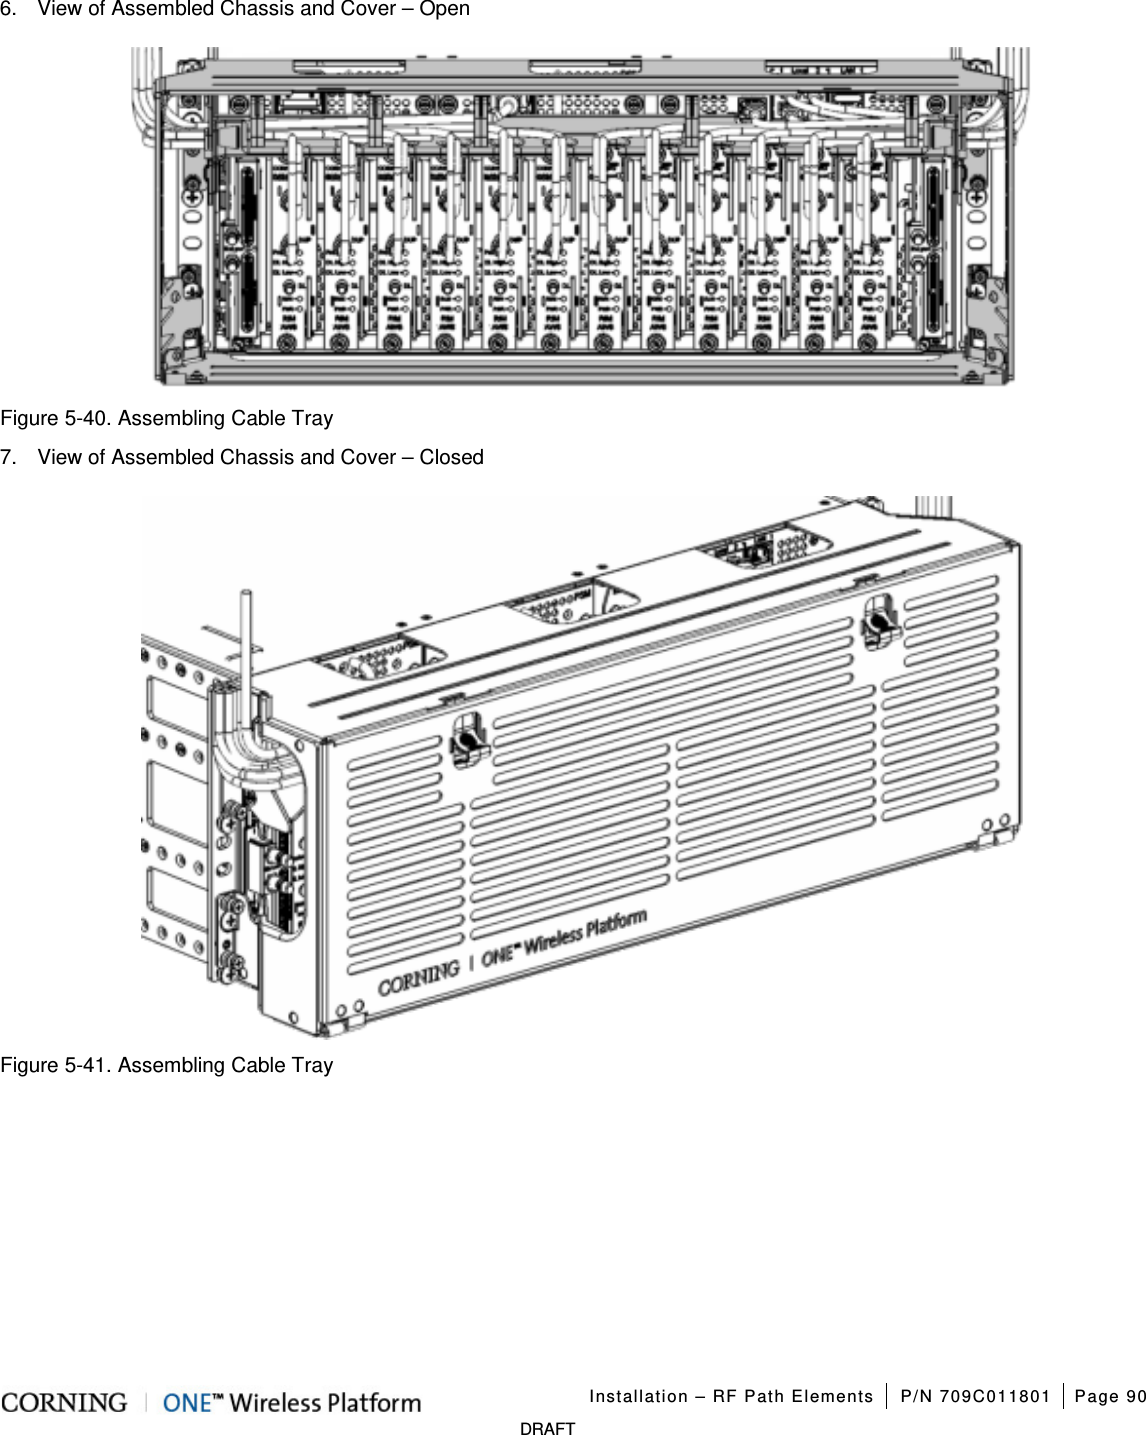   Installation – RF Path Elements P/N 709C011801 Page 90   DRAFT 6.  View of Assembled Chassis and Cover – Open    Figure  5-40. Assembling Cable Tray 7.  View of Assembled Chassis and Cover – Closed  Figure  5-41. Assembling Cable Tray    